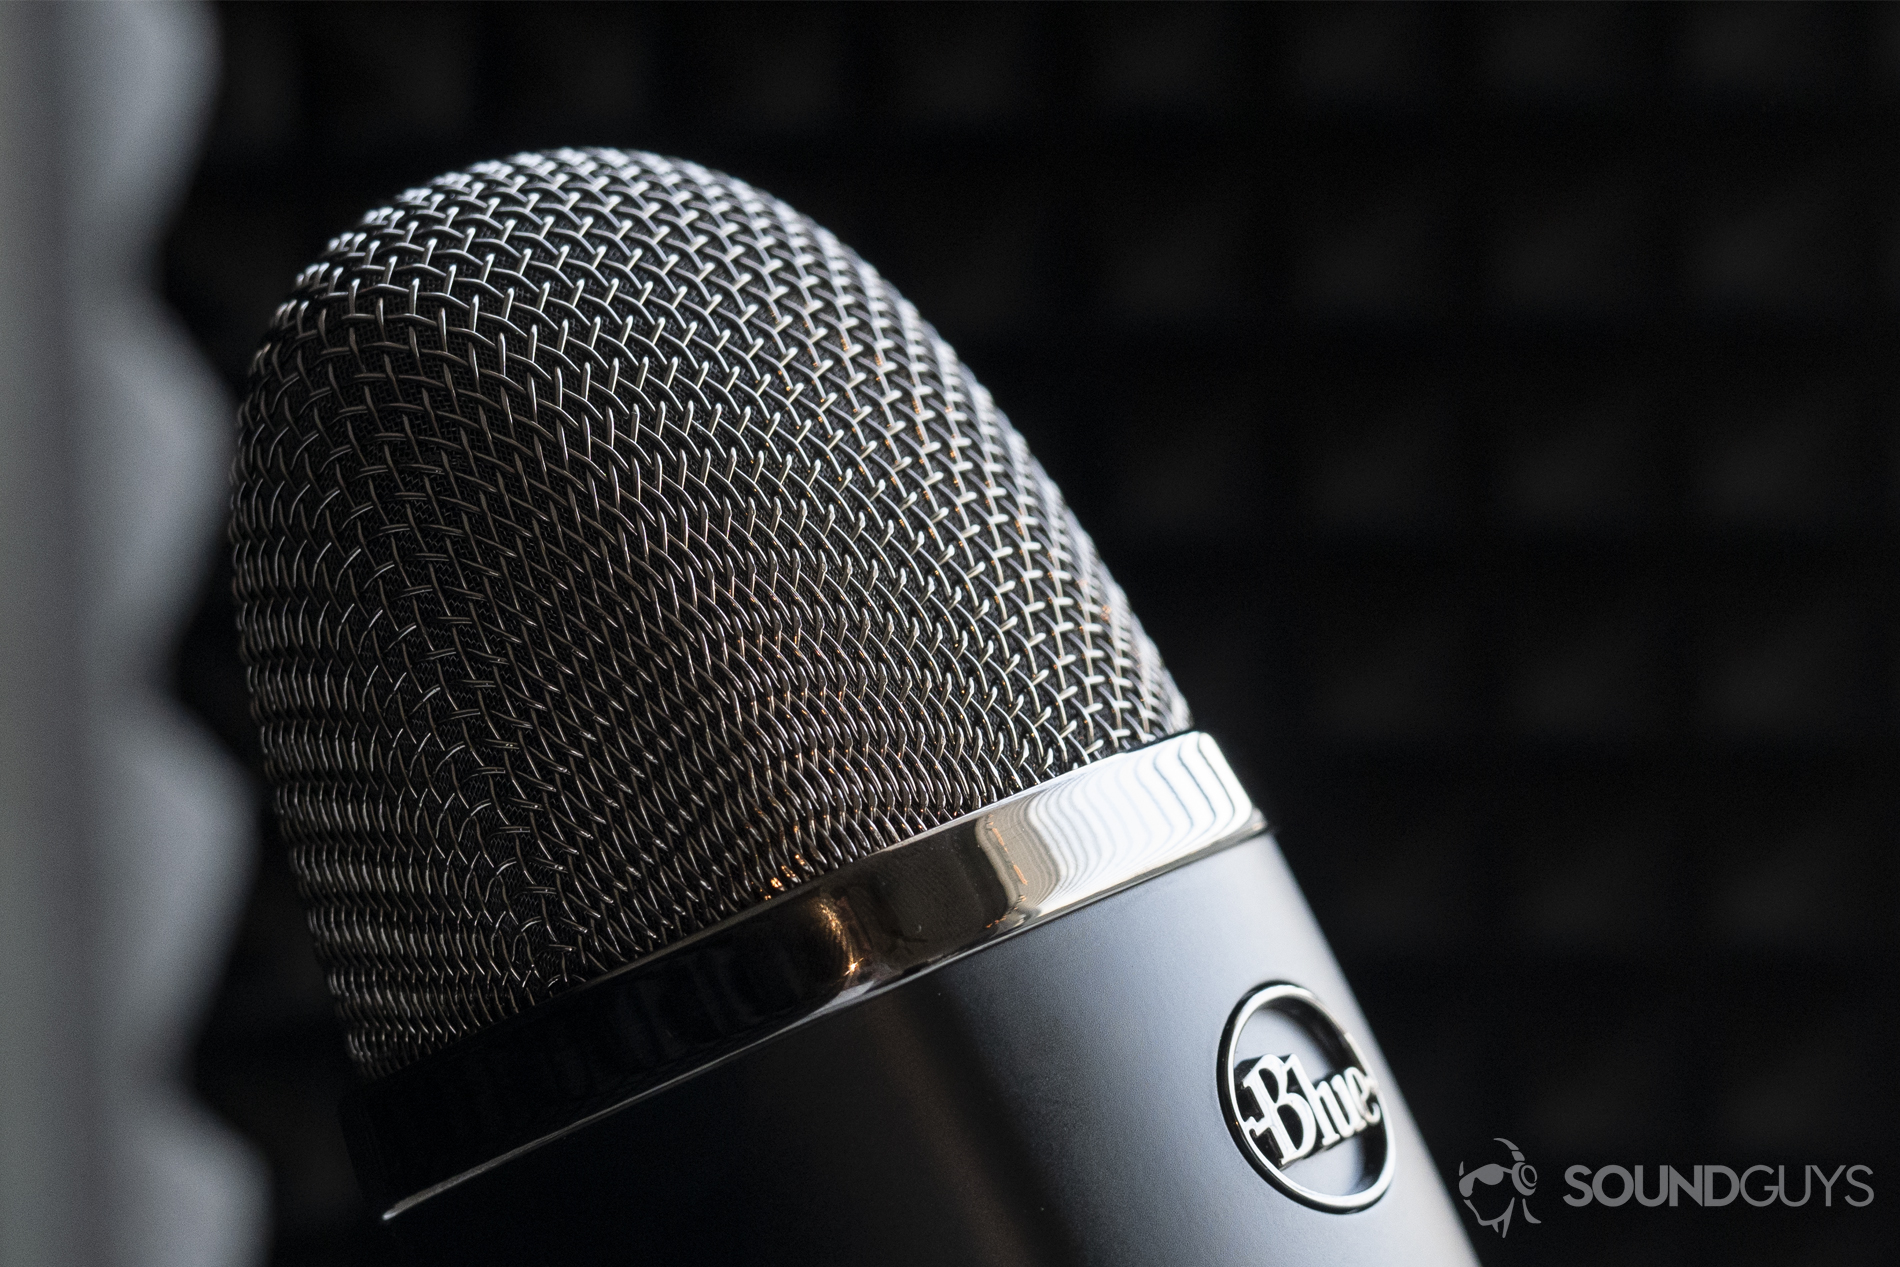 Review: Pump Up the Volume with the Blue Yeti USB Microphone